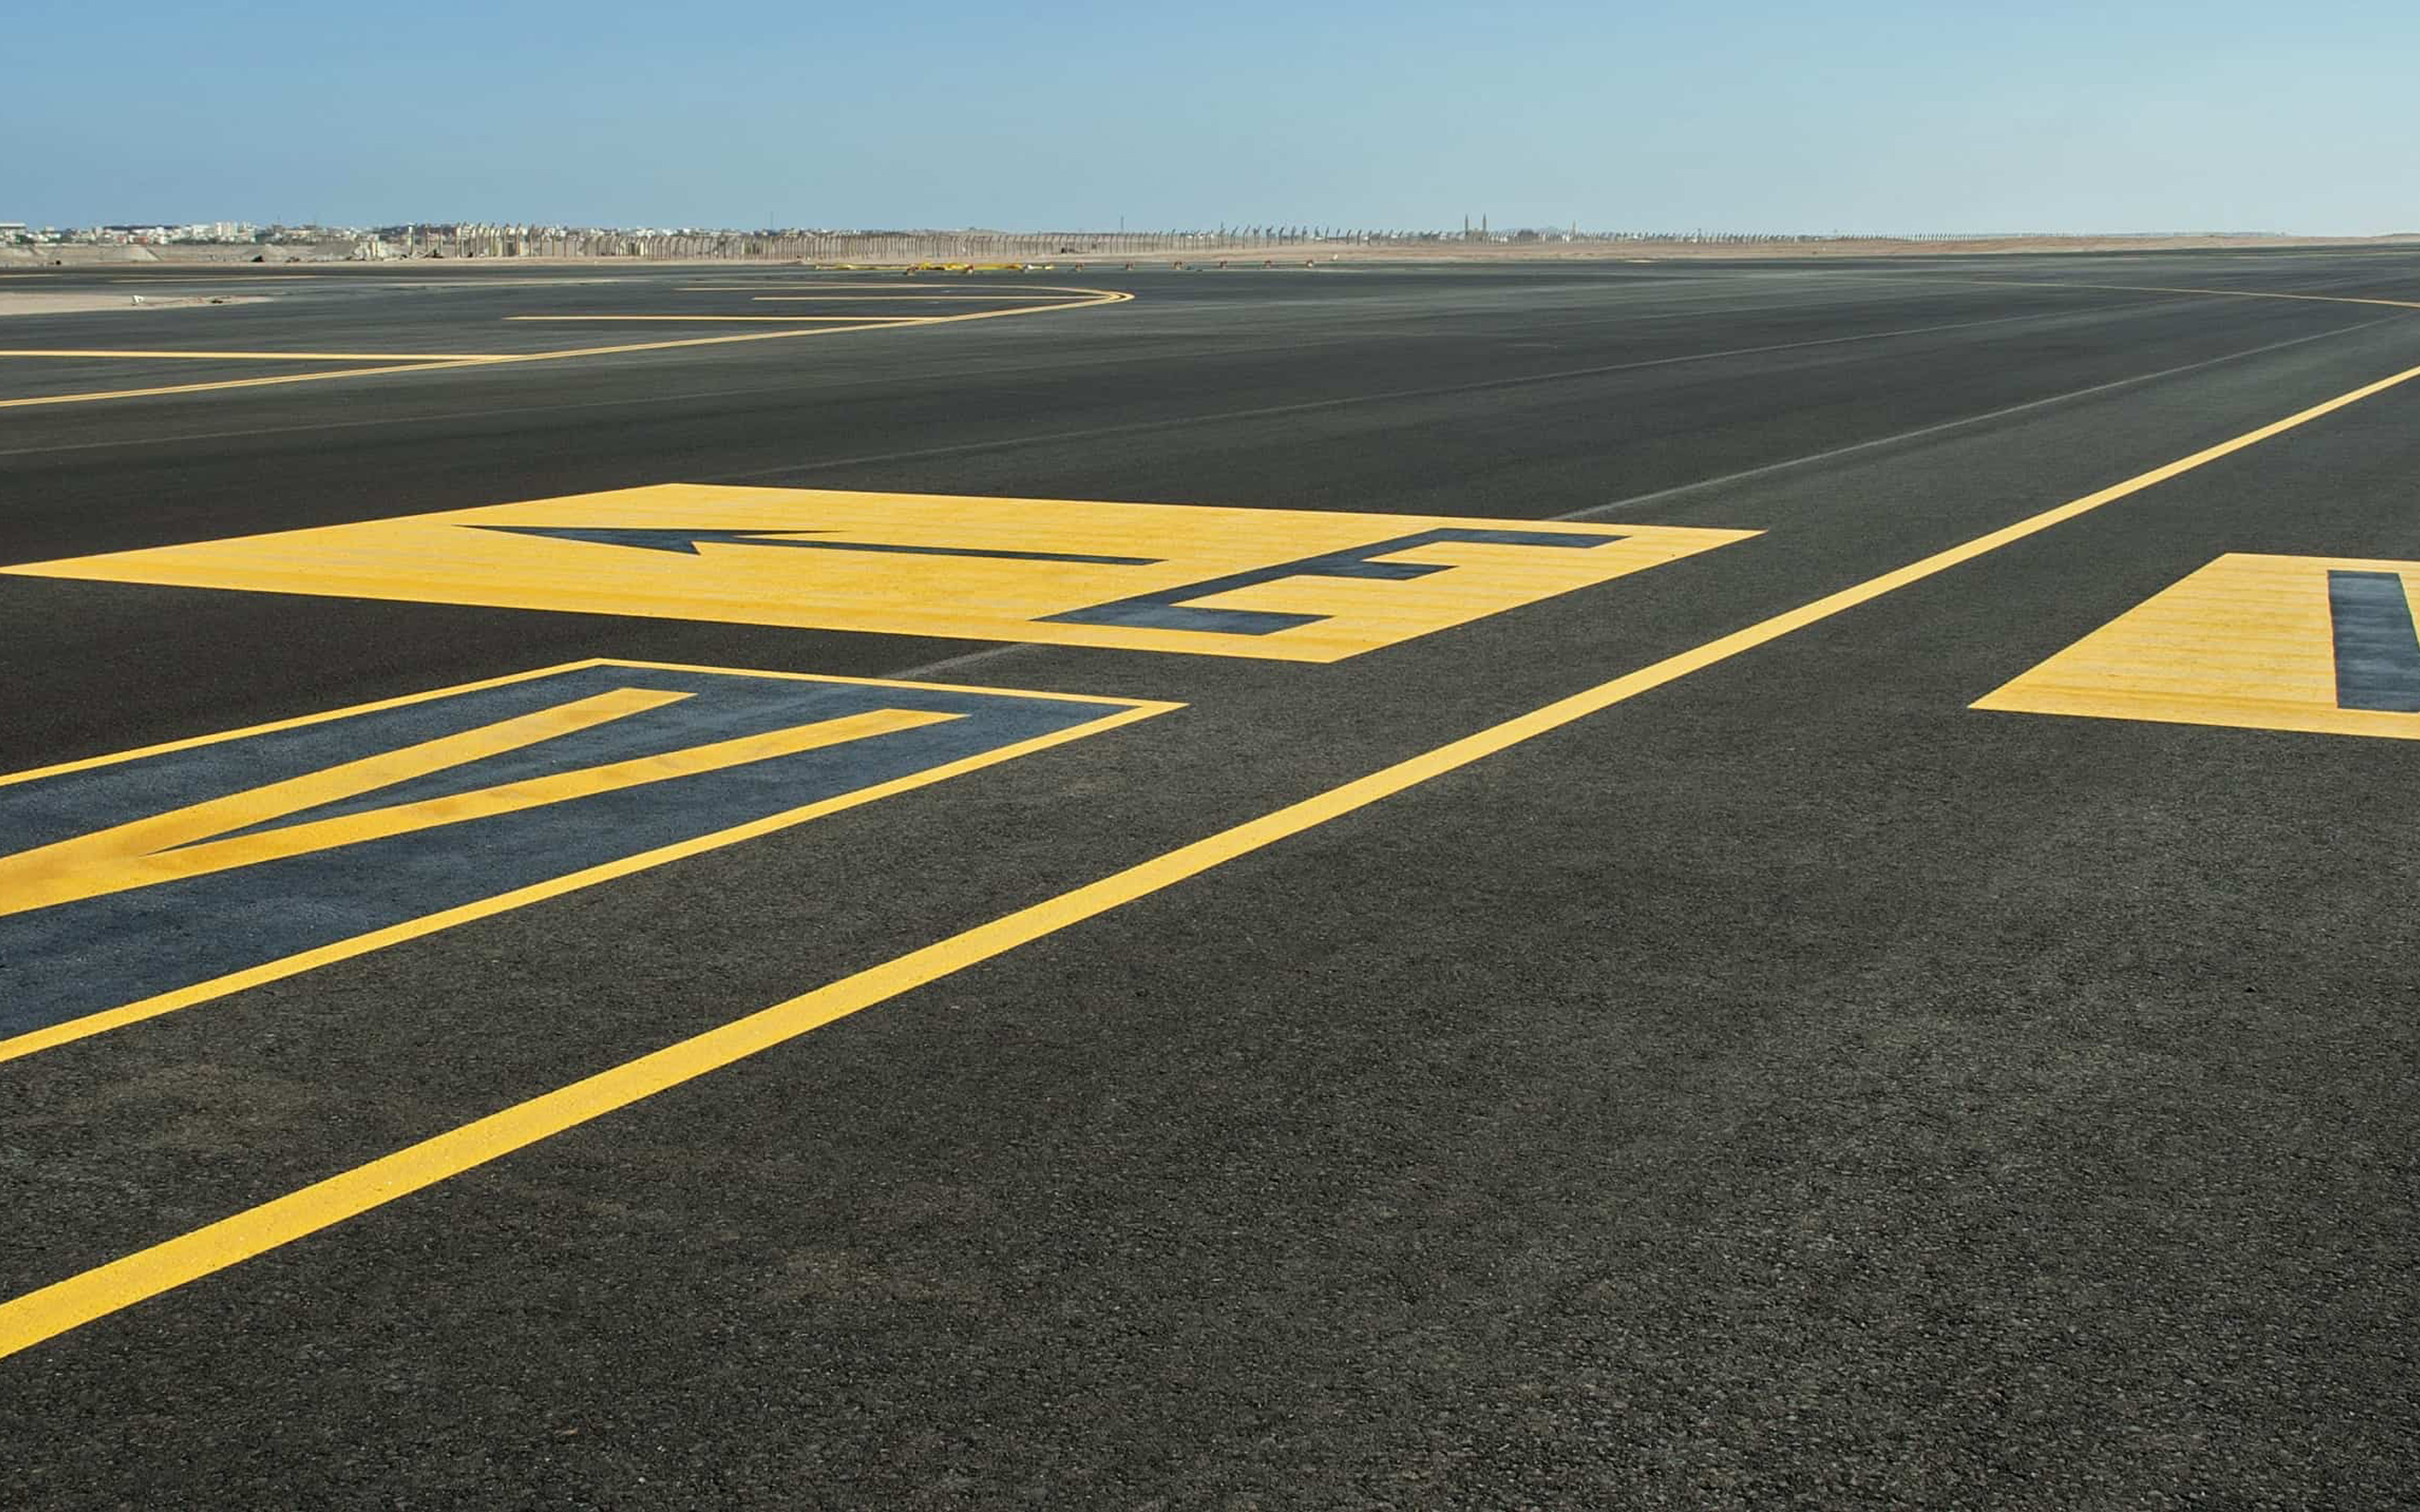 Download wallpaper airport, runway, arrows on the asphalt, yellow pointers, aircraft for desktop with resolution 2880x1800. High Quality HD picture wallpaper